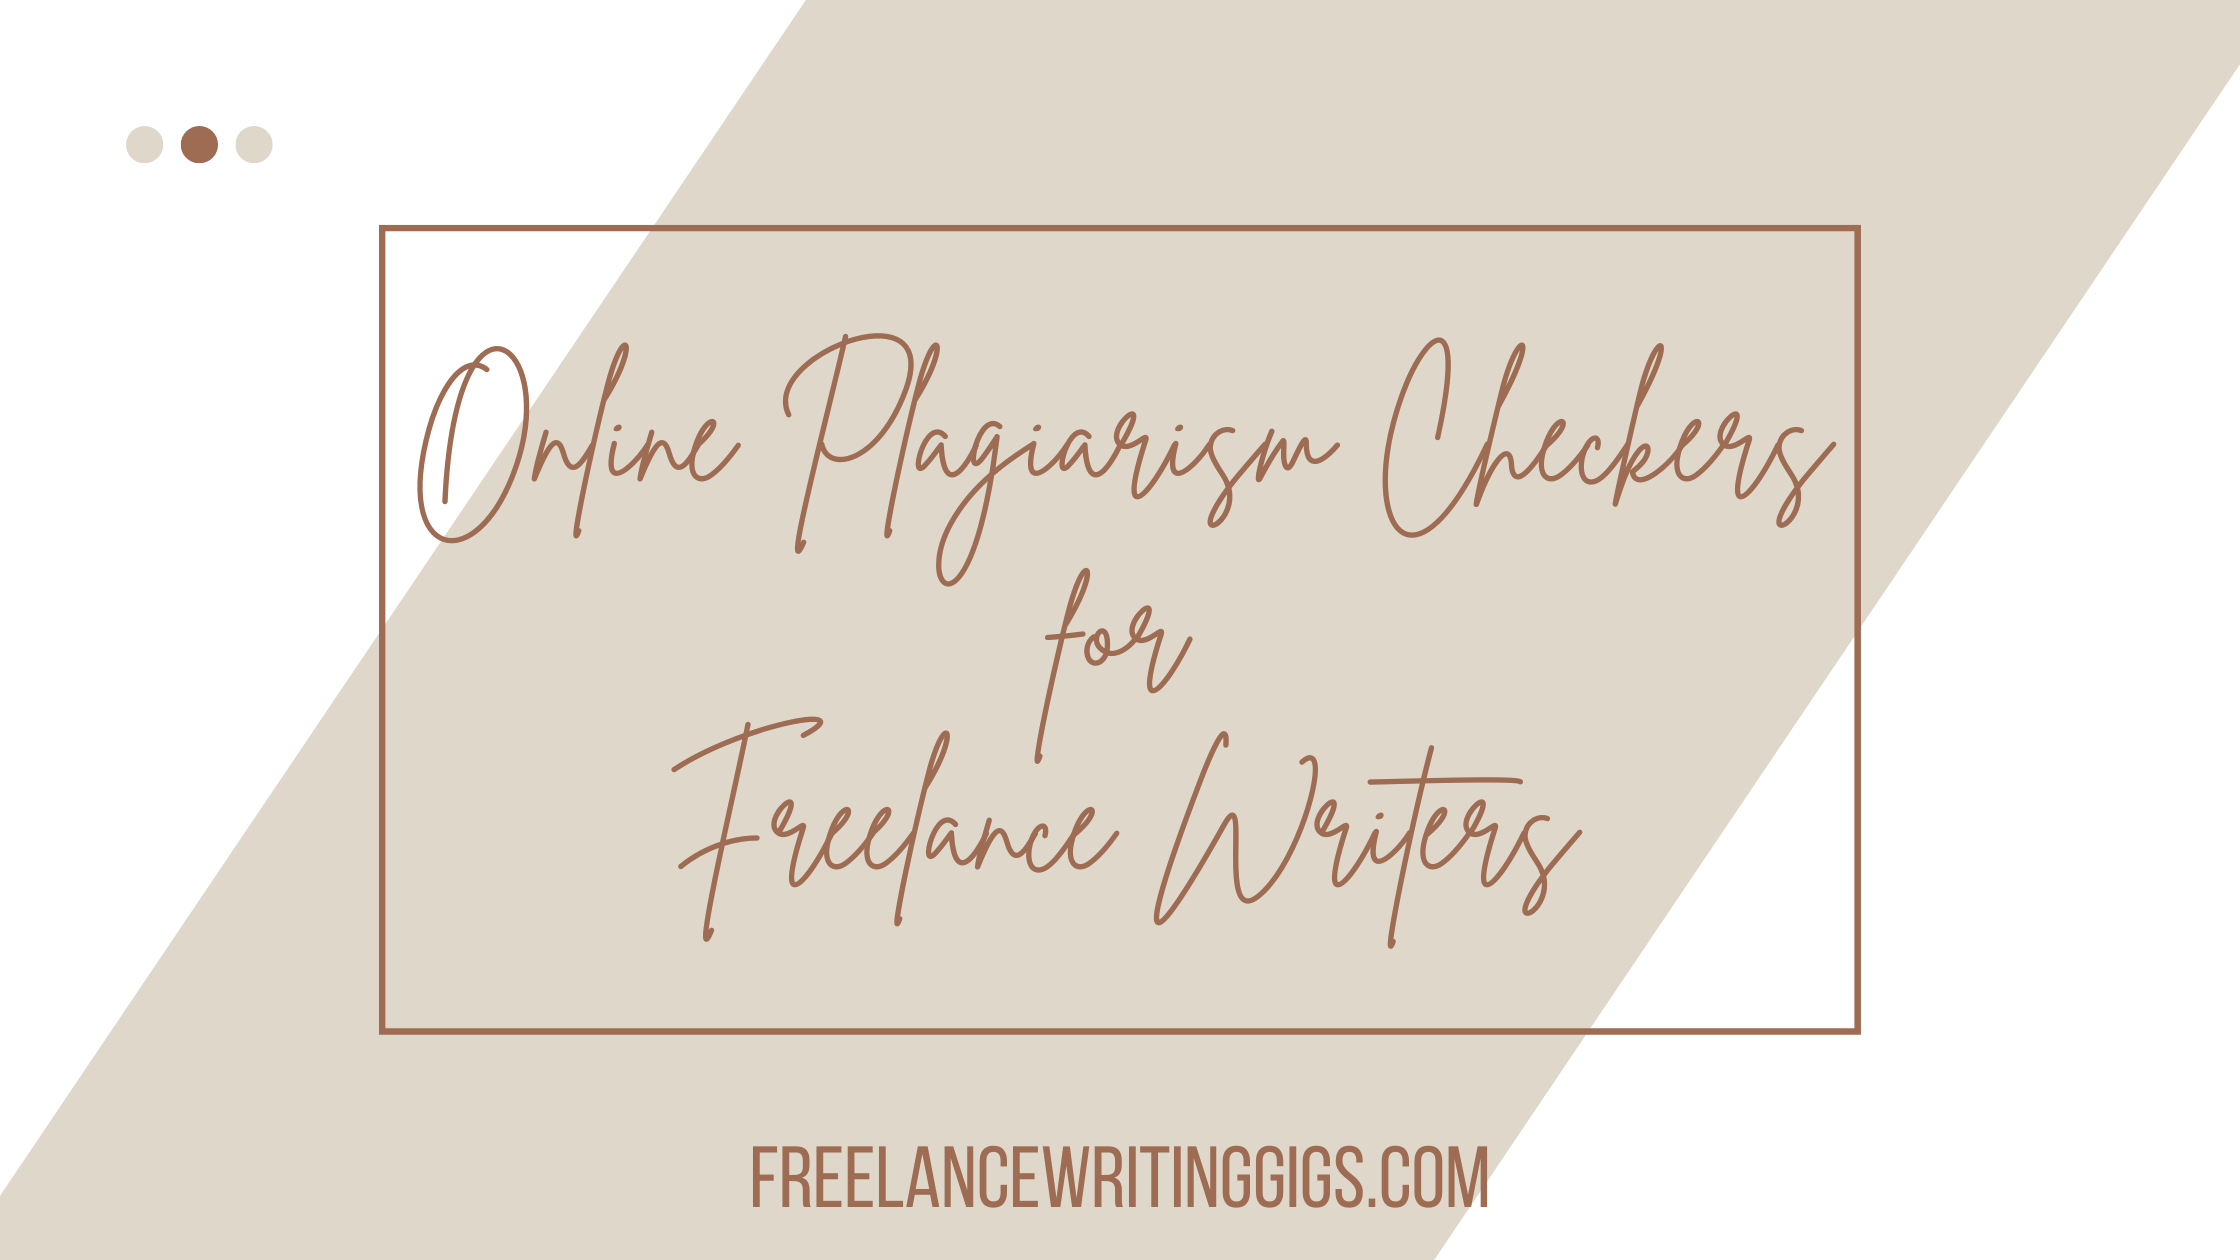 Online Plagiarism Checkers for Freelance Writers